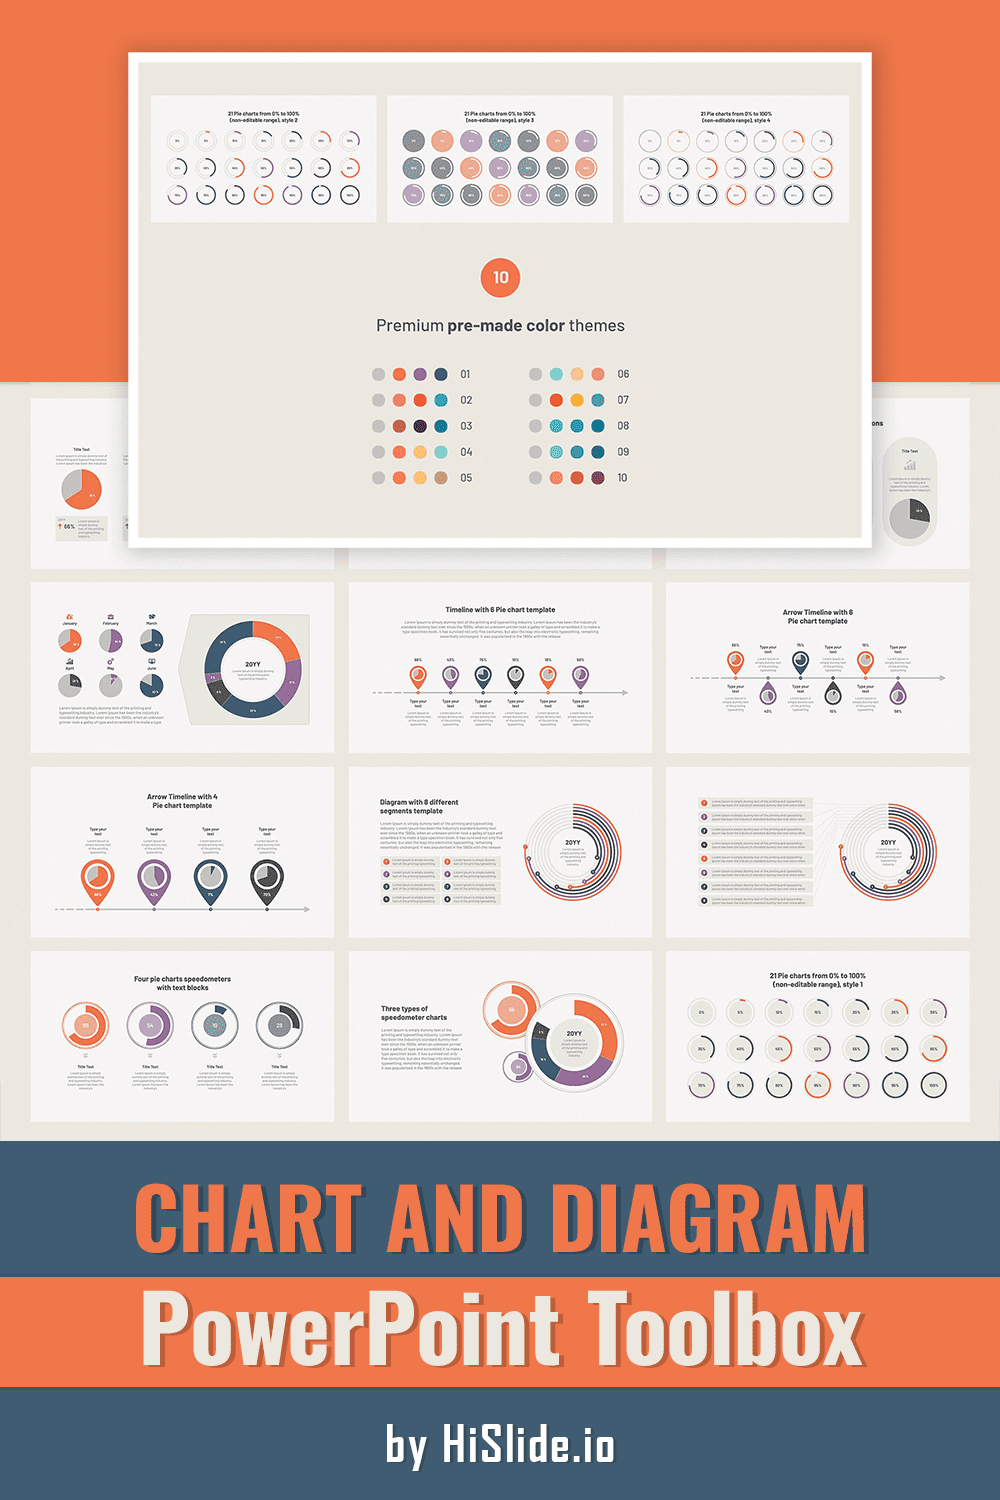 Chart and Diagram PowerPoint Toolbox pinterest image.